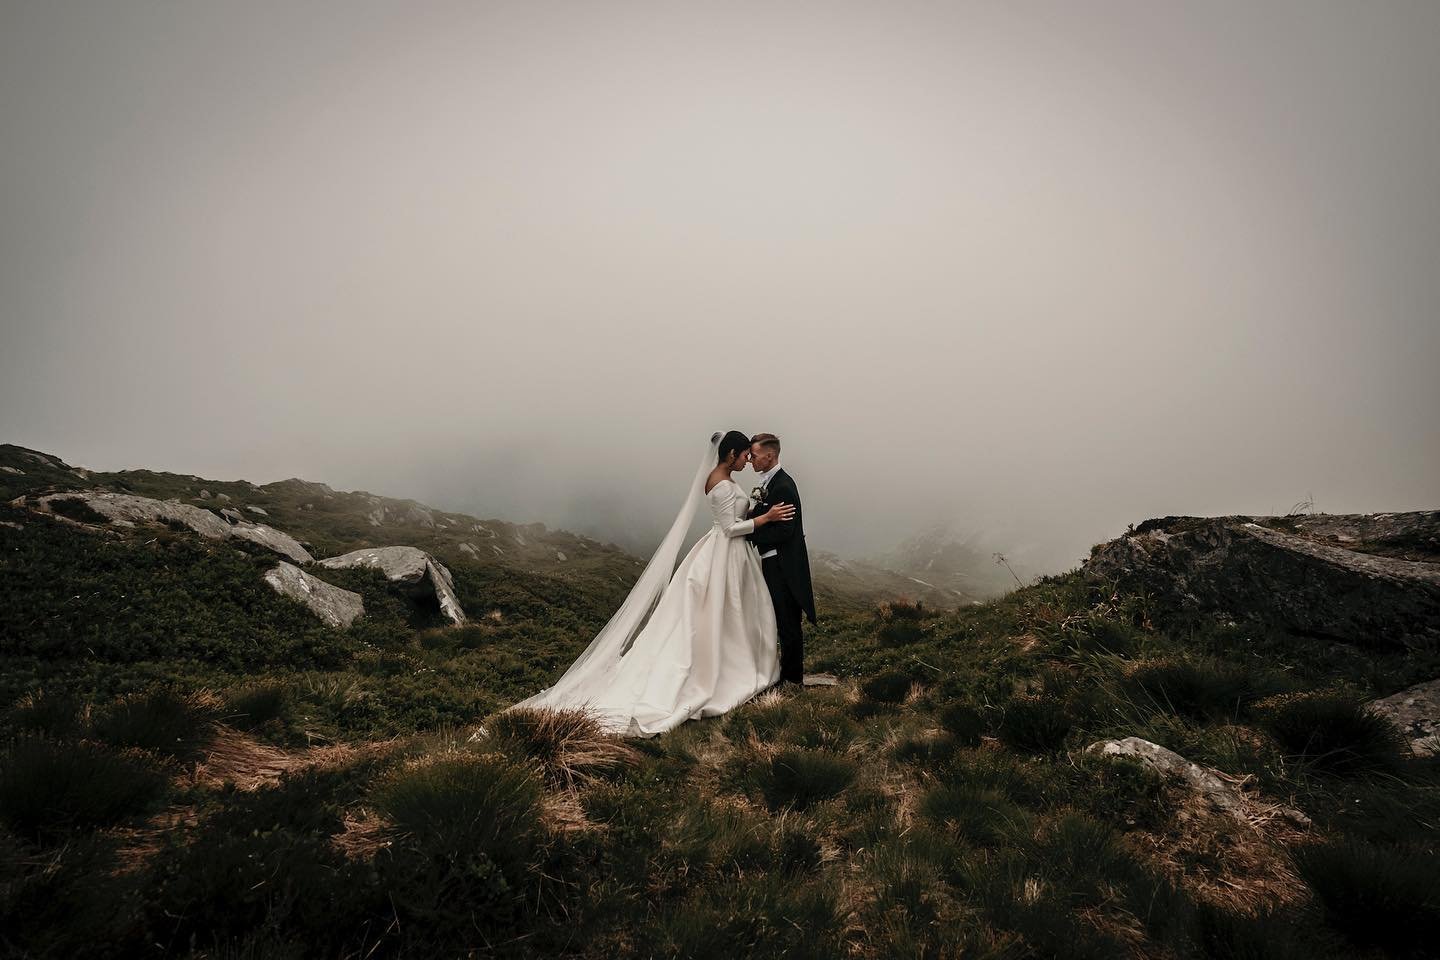 I&rsquo;ve dedicated this year and upcoming season to more shoots where my heart skips a beat when looking through the viewfinder, like it did during Lena and J&oslash;rgen&rsquo;s wedding shoot.
Working with couples like this, that trust my vision a